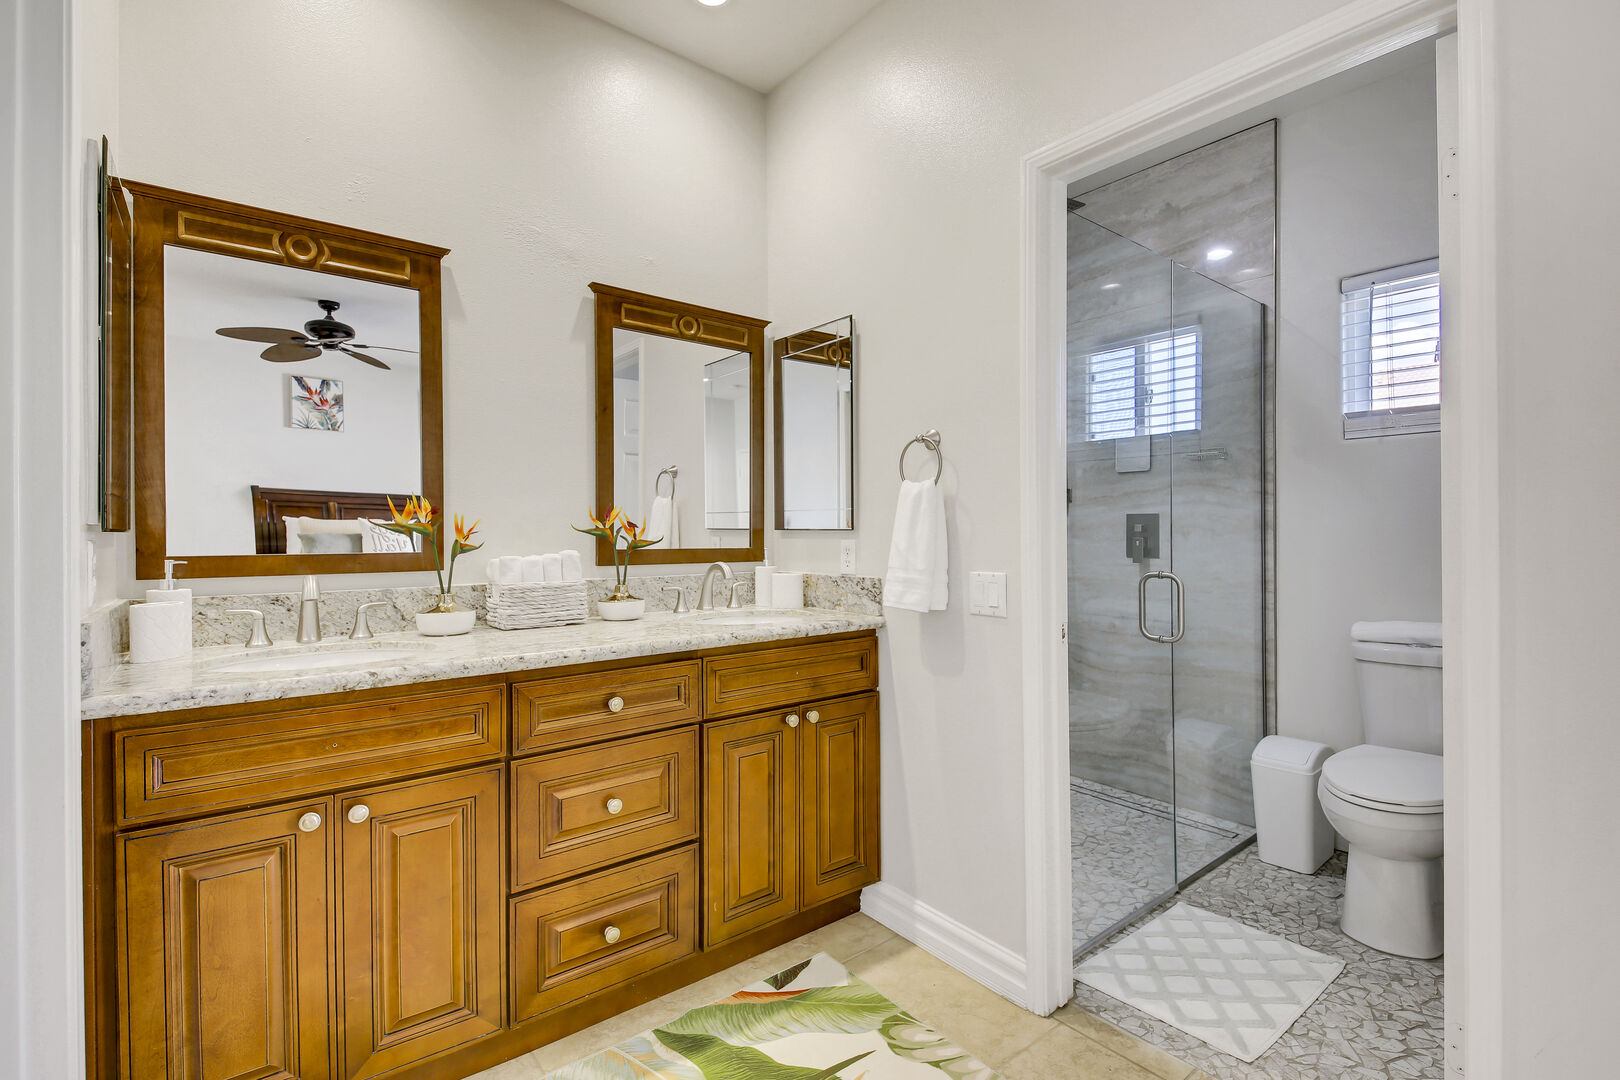 The private, en suite bathroom features a tile shower and double vanity sinks.